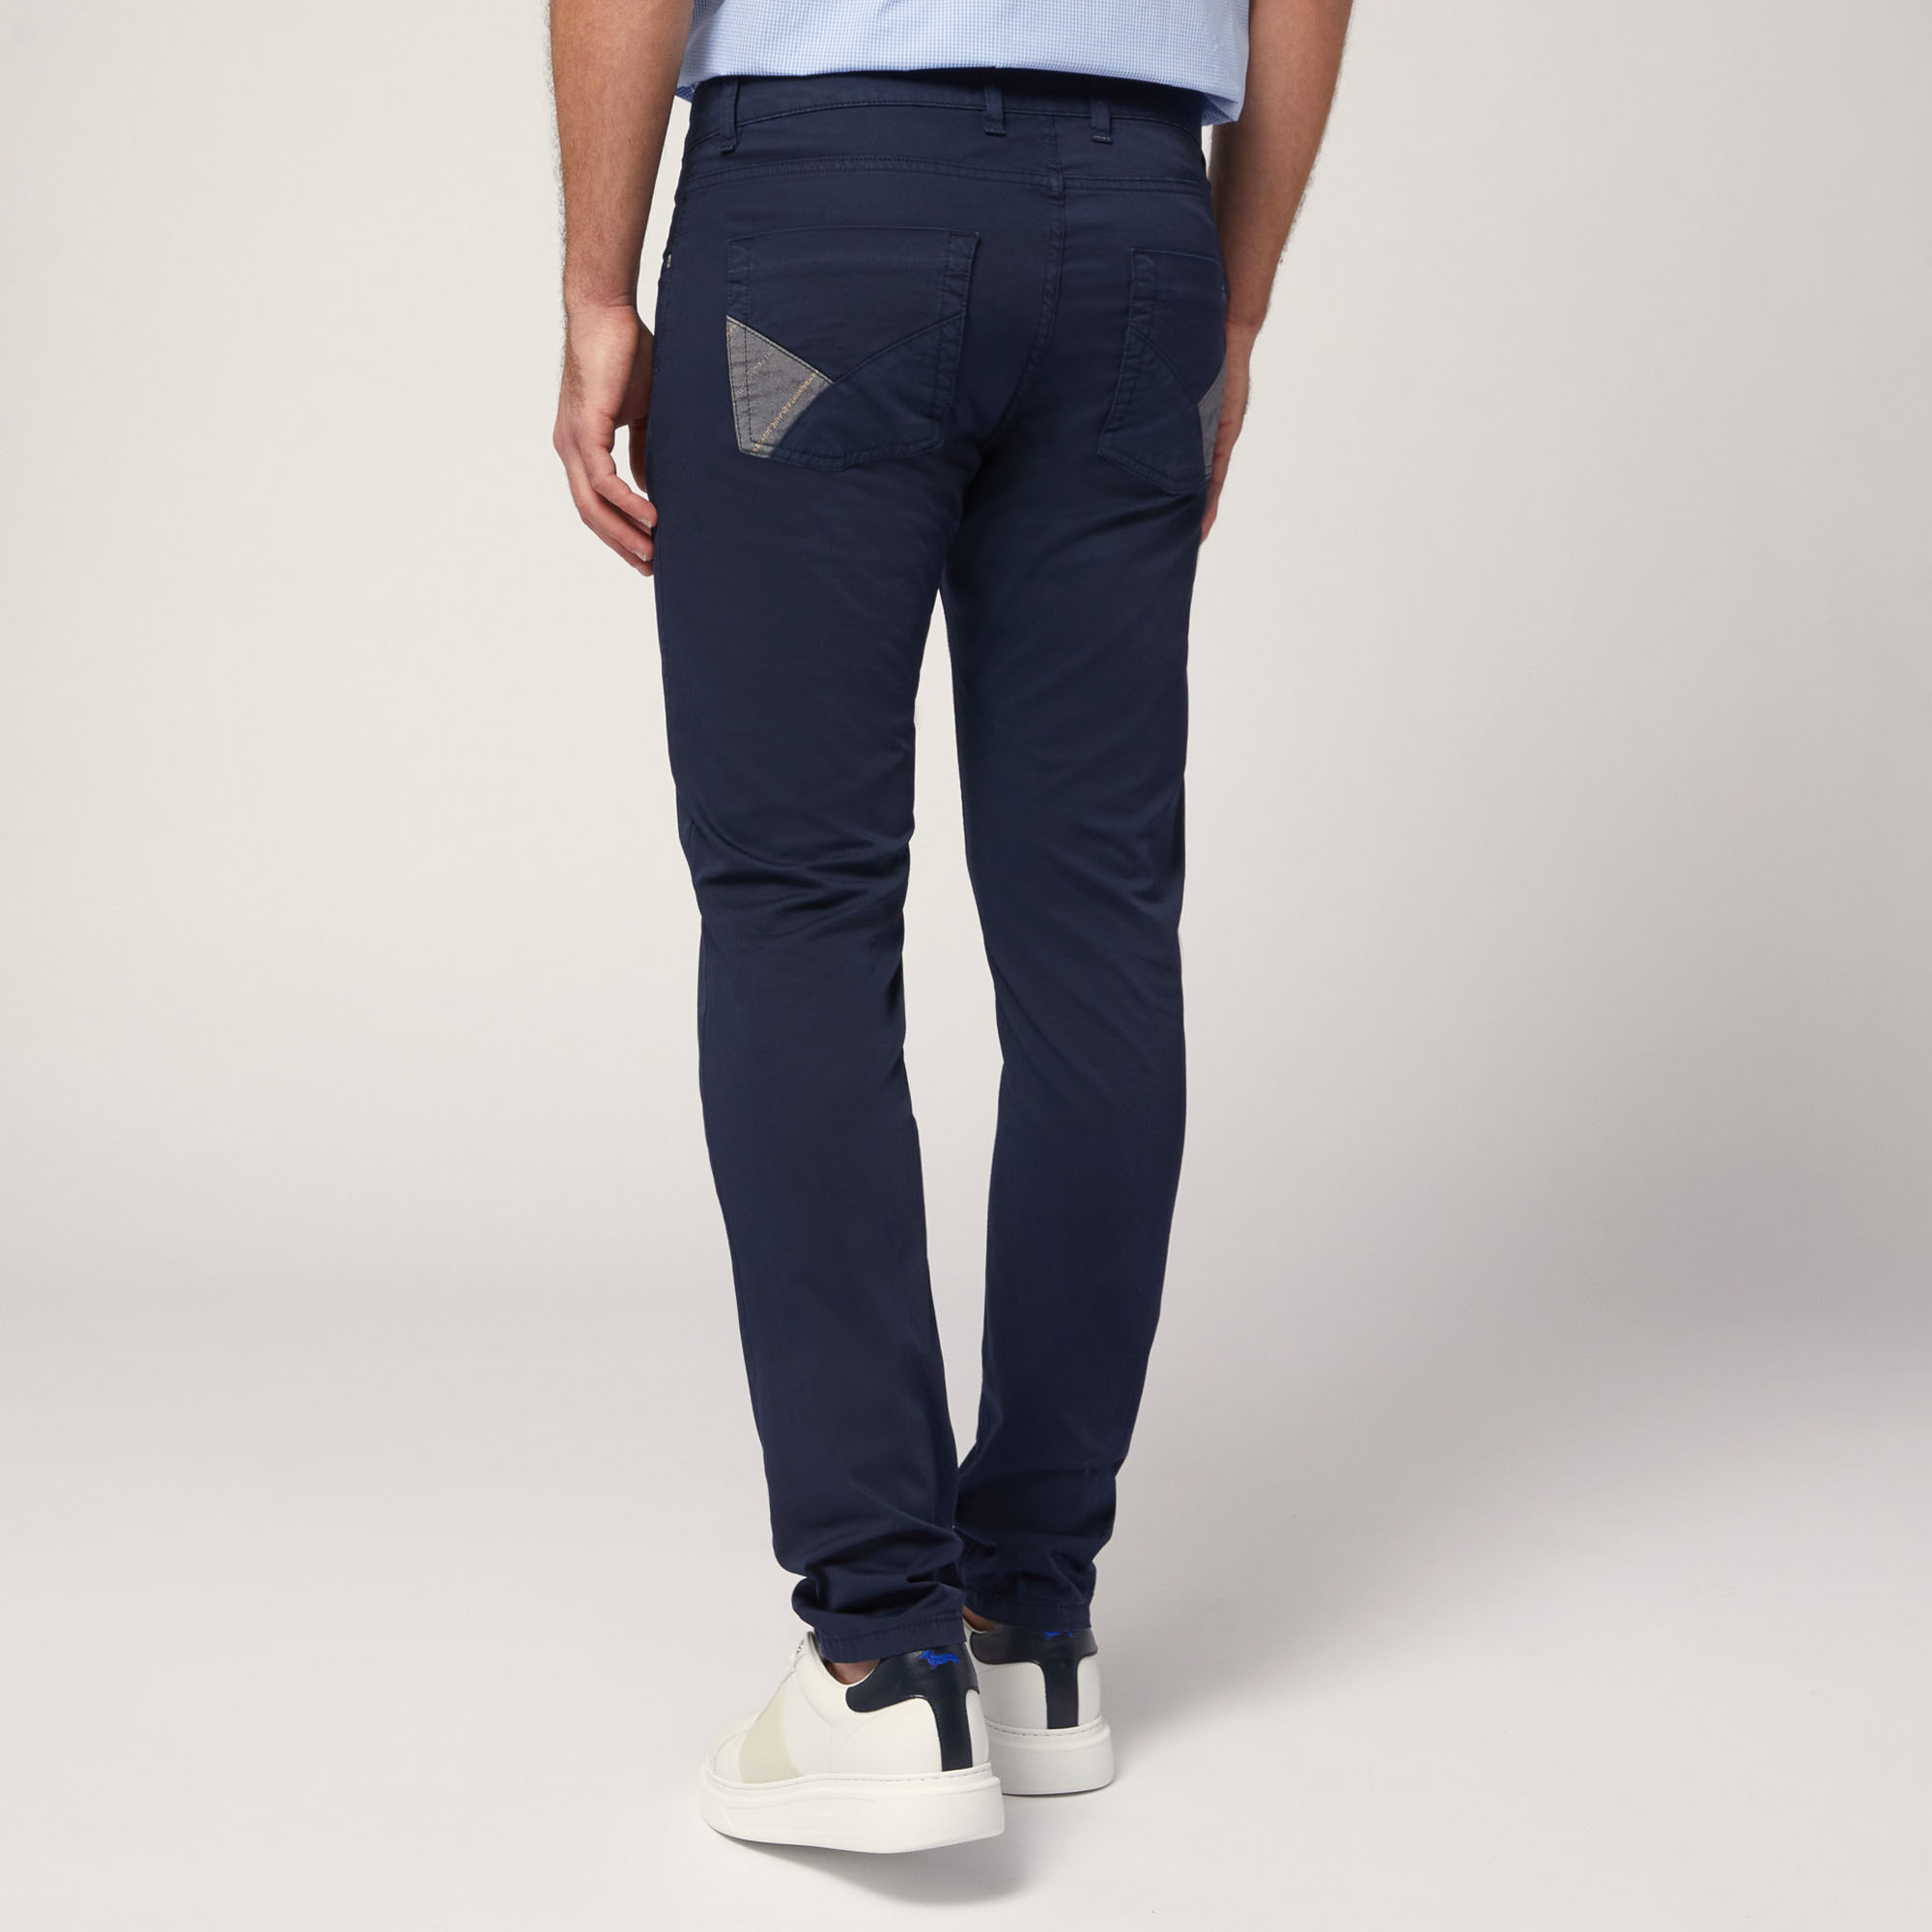 Pants with Inserts, Blue, large image number 1